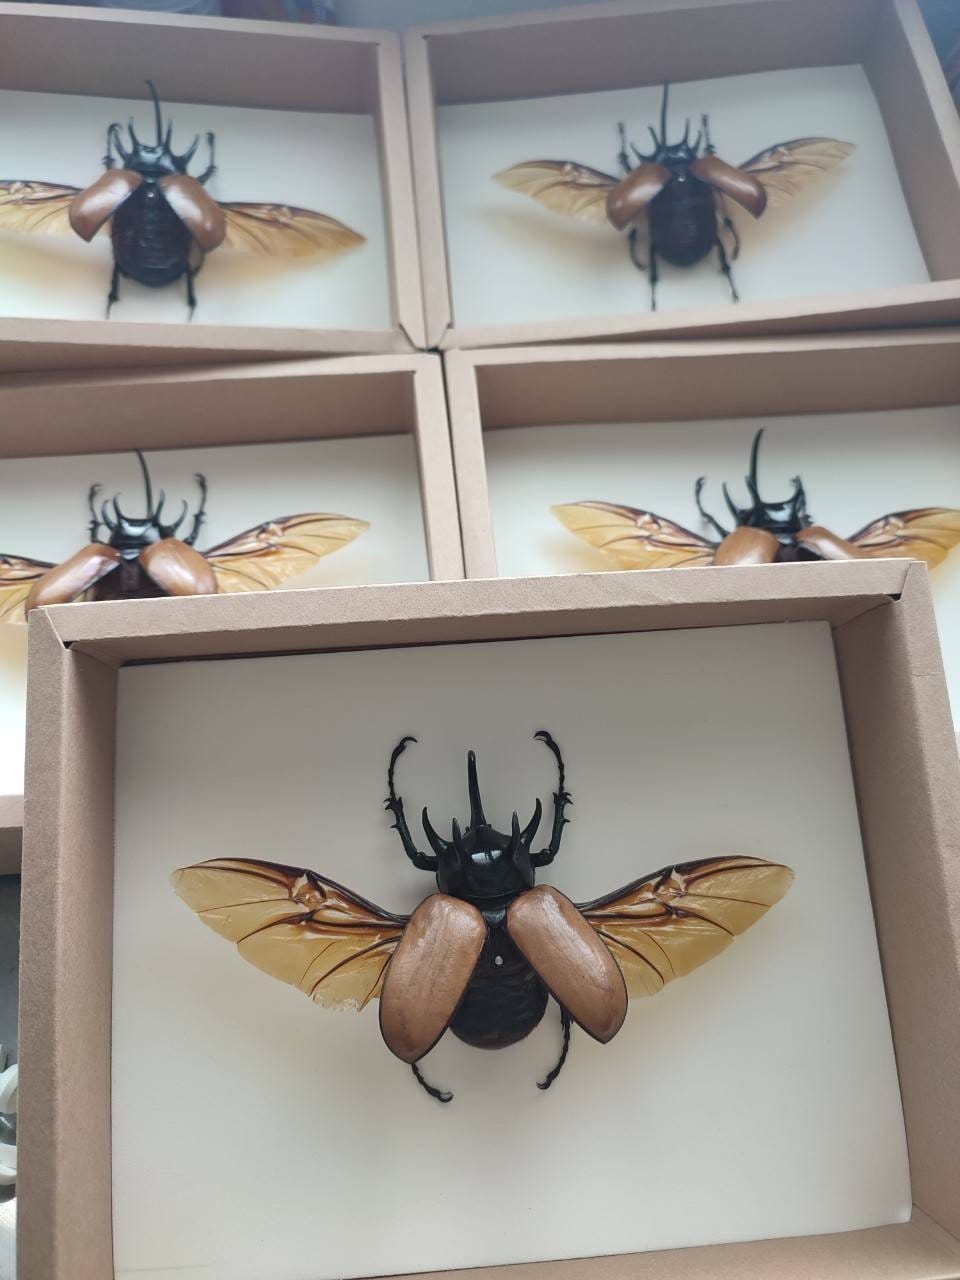 SPECIAL OFFER 10 Giant Spread Specimens of Five-horned Rhino Beetles (Eupatorus gracilicornis) A1/A- Free Shipping, Ready to Frame!